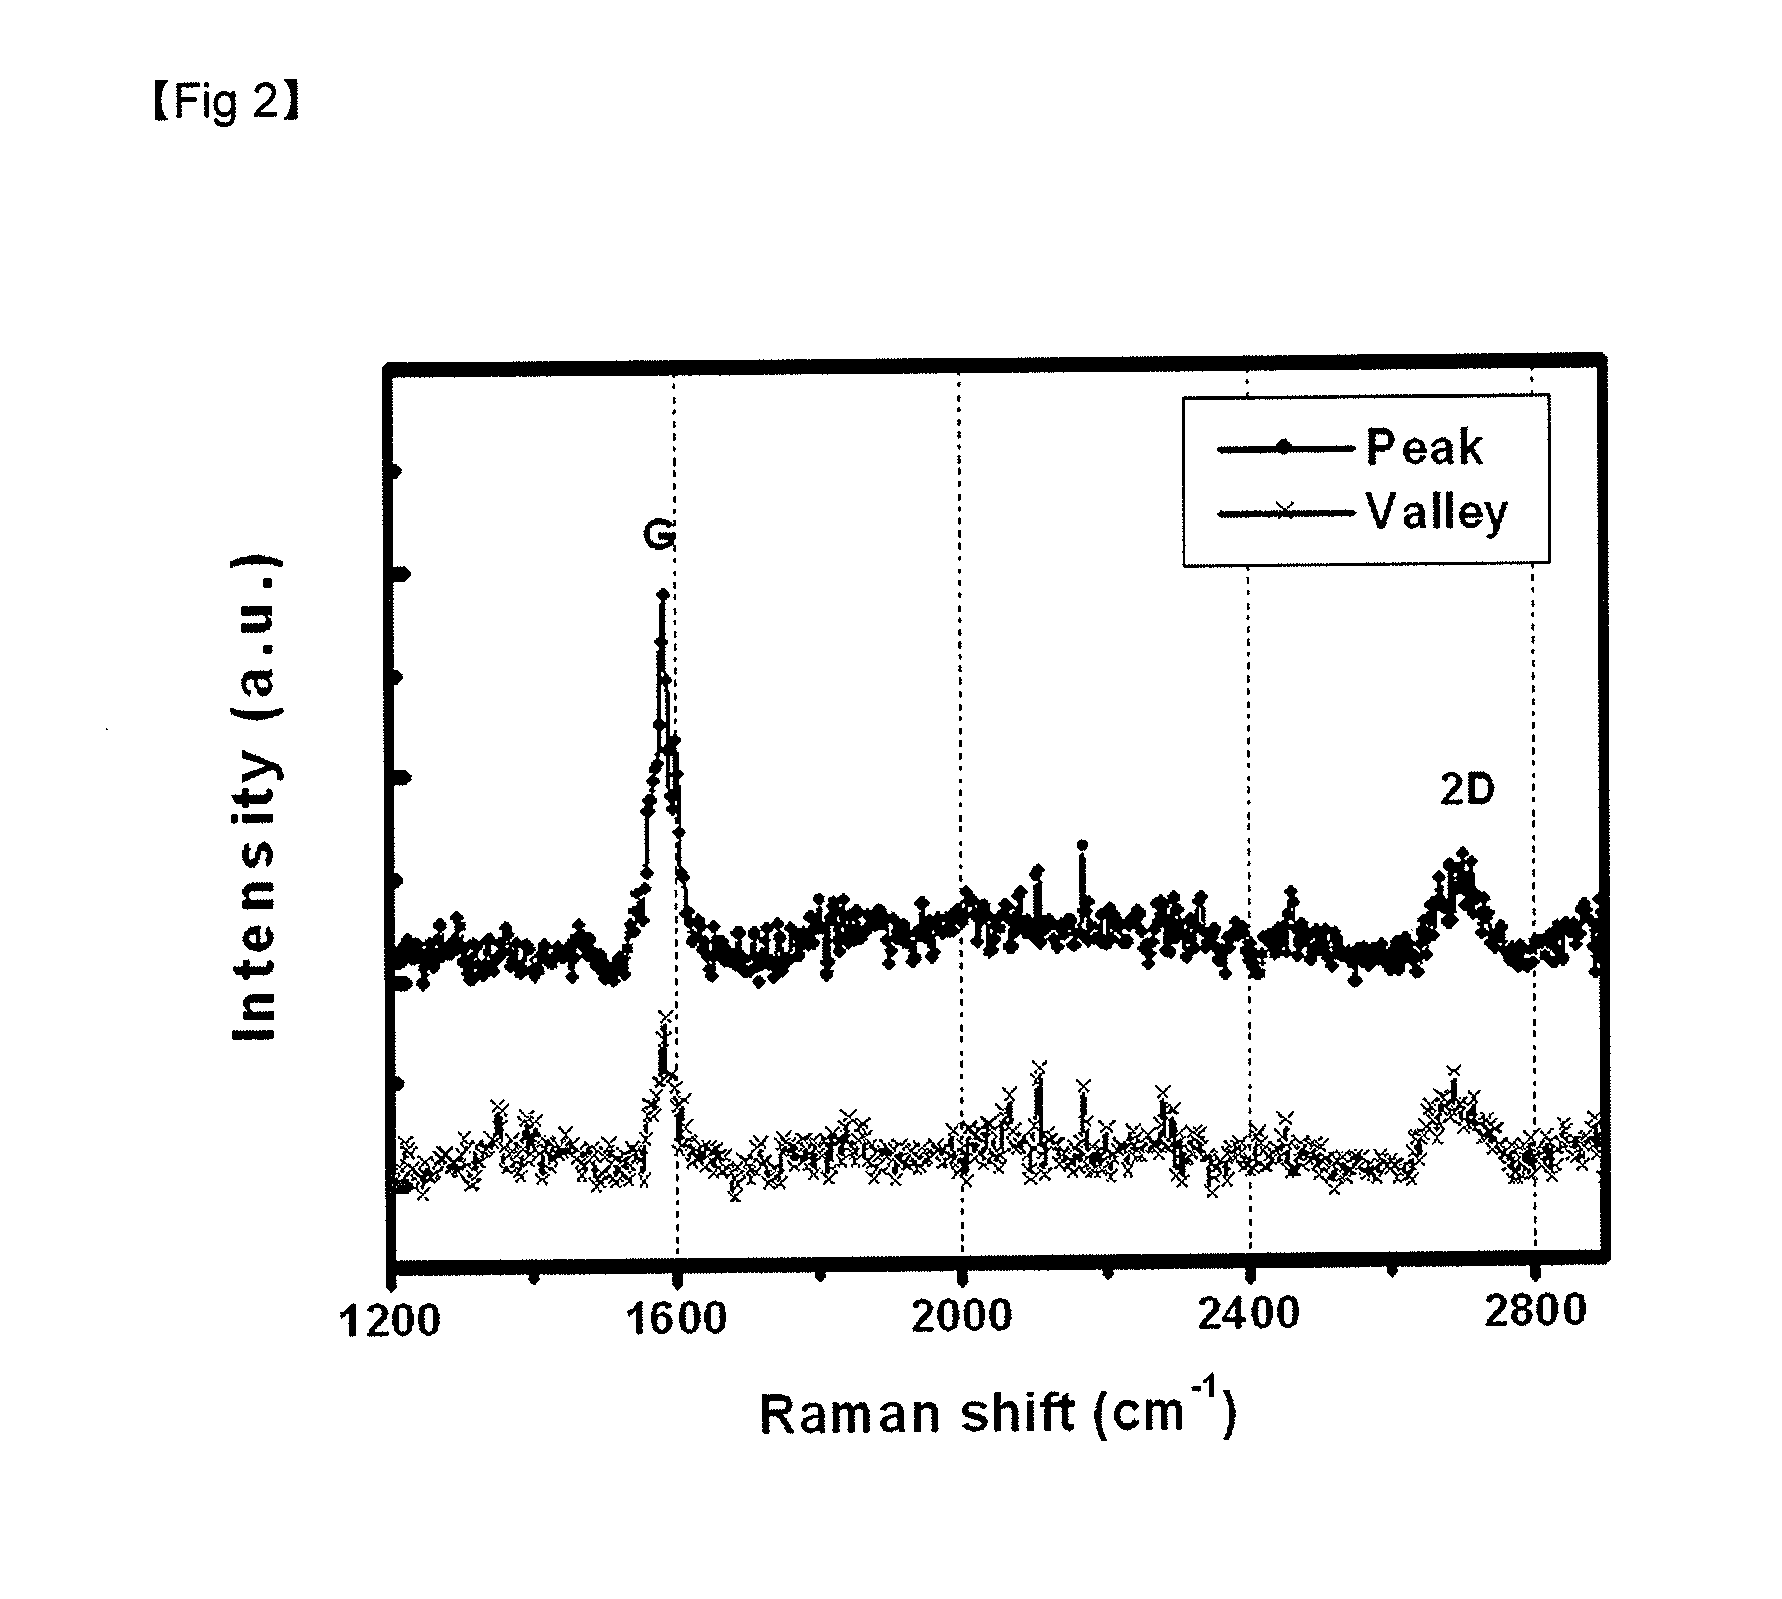 Carbonaceous Nanocomposite Having Novel Structure And Fabrication Method Thereof